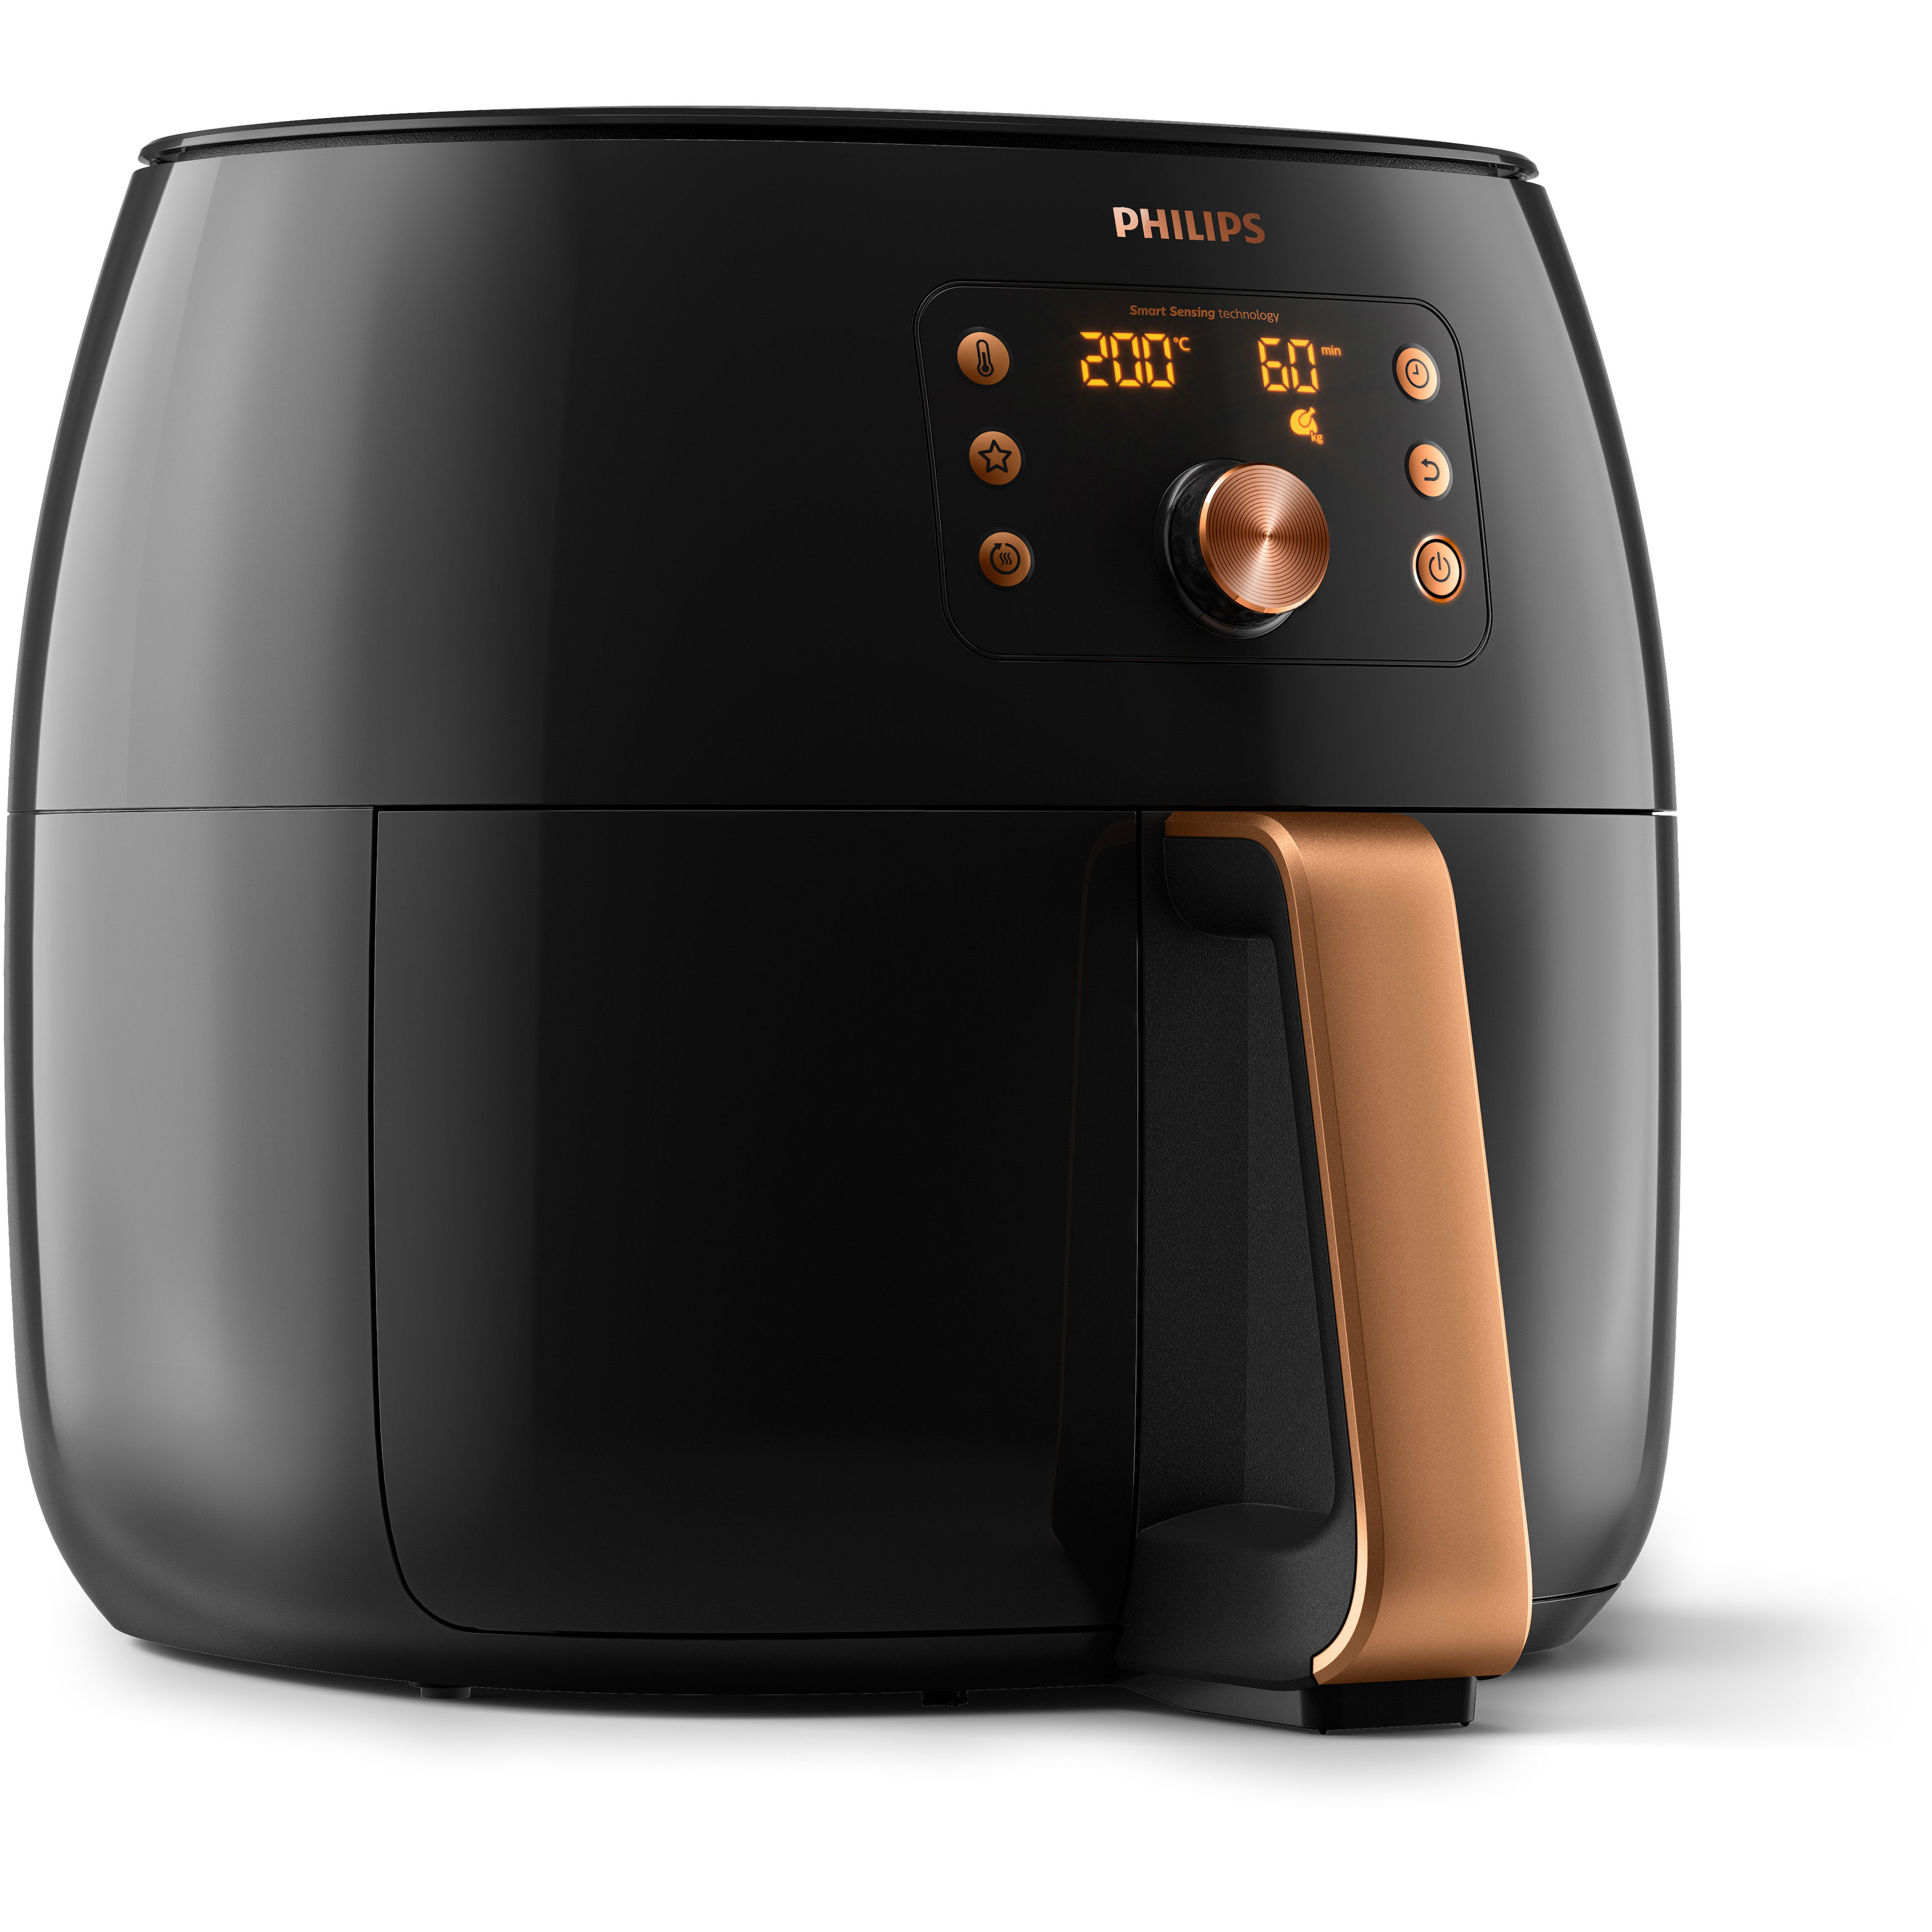 Download image (.jpg) The new Philips Airfryer XXL with Smart Sensing Technology (opens in a new window)